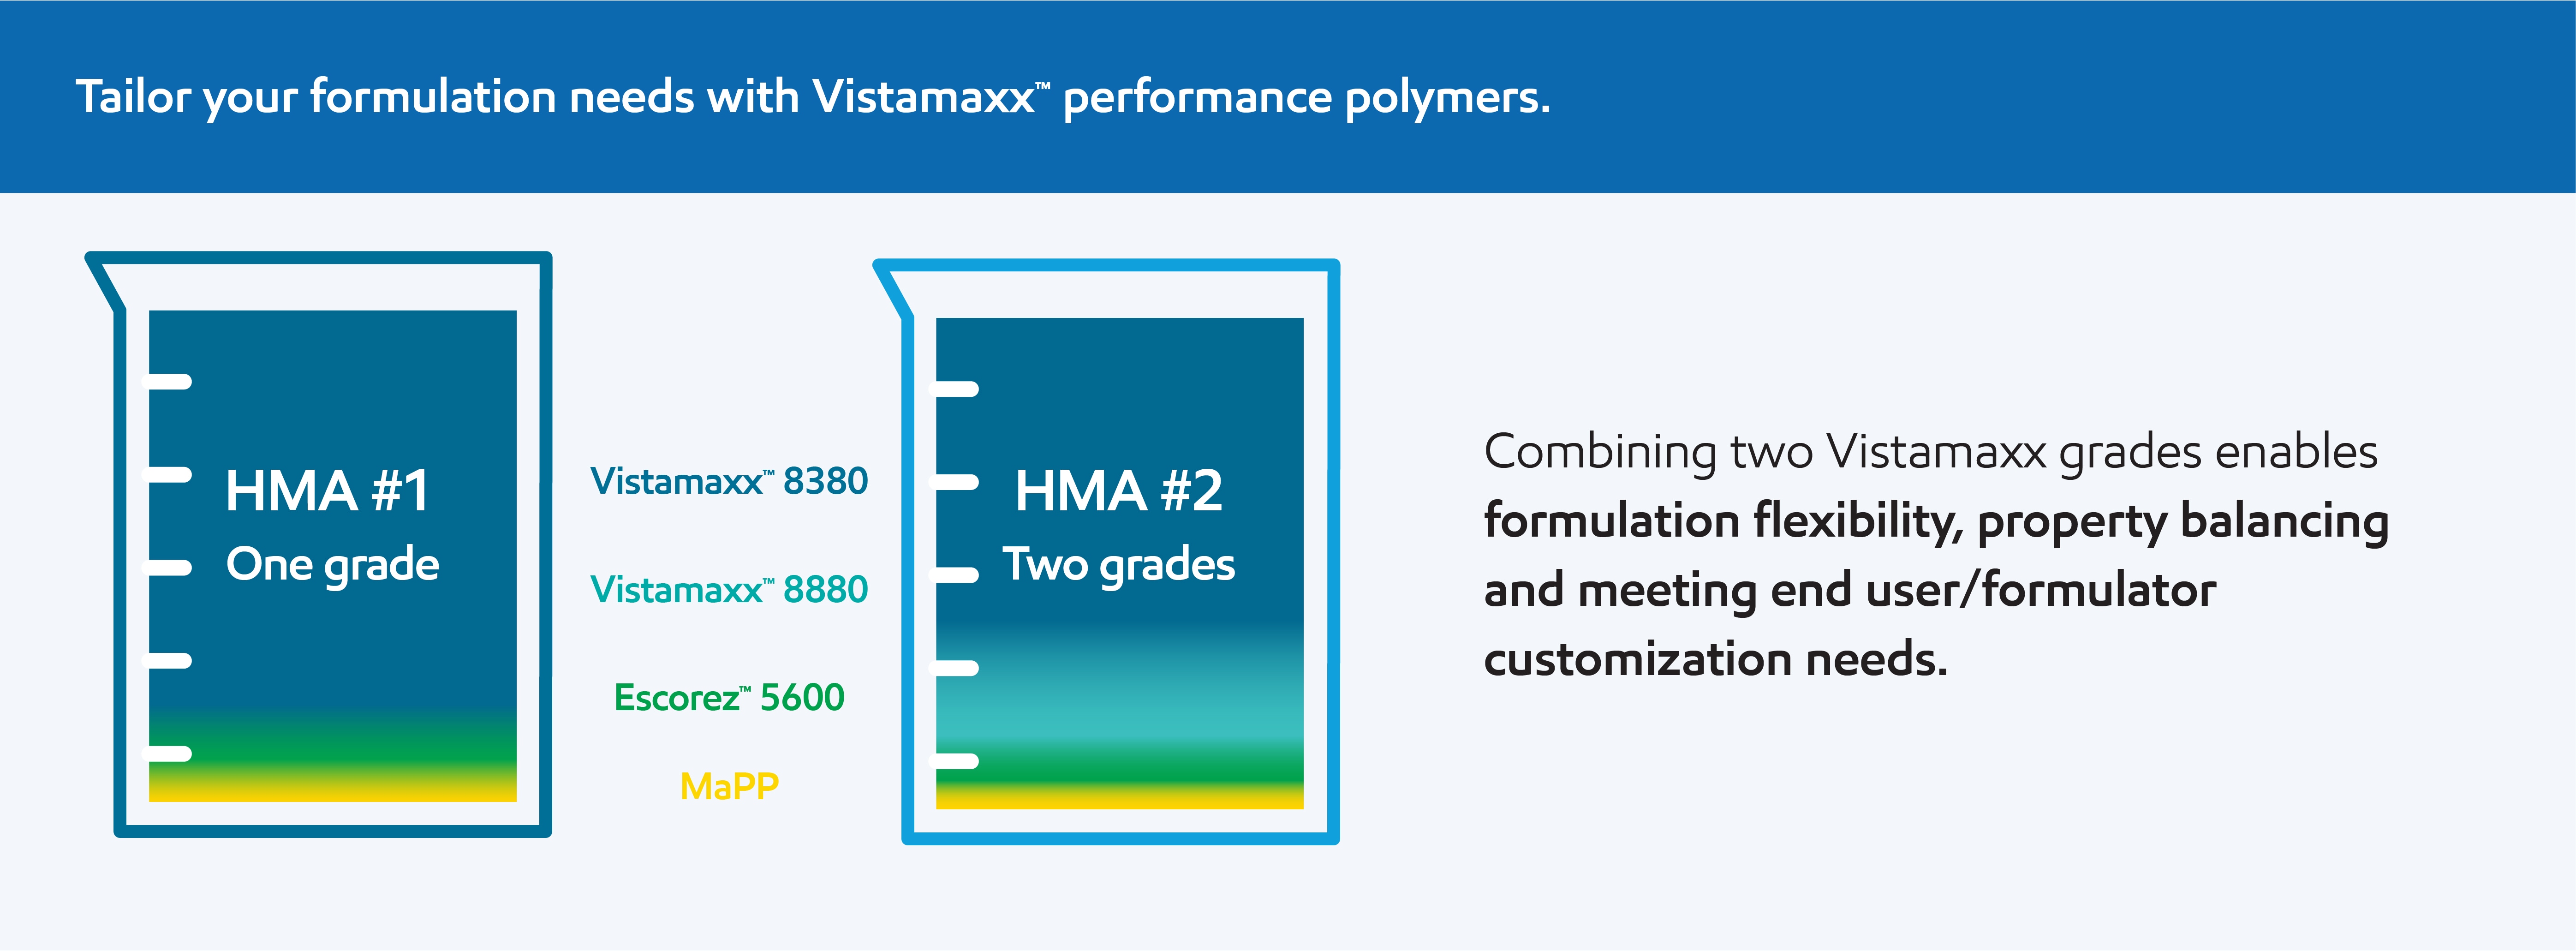 Combining two Vistmaxx grades enables formulation flexibility and property balancing.